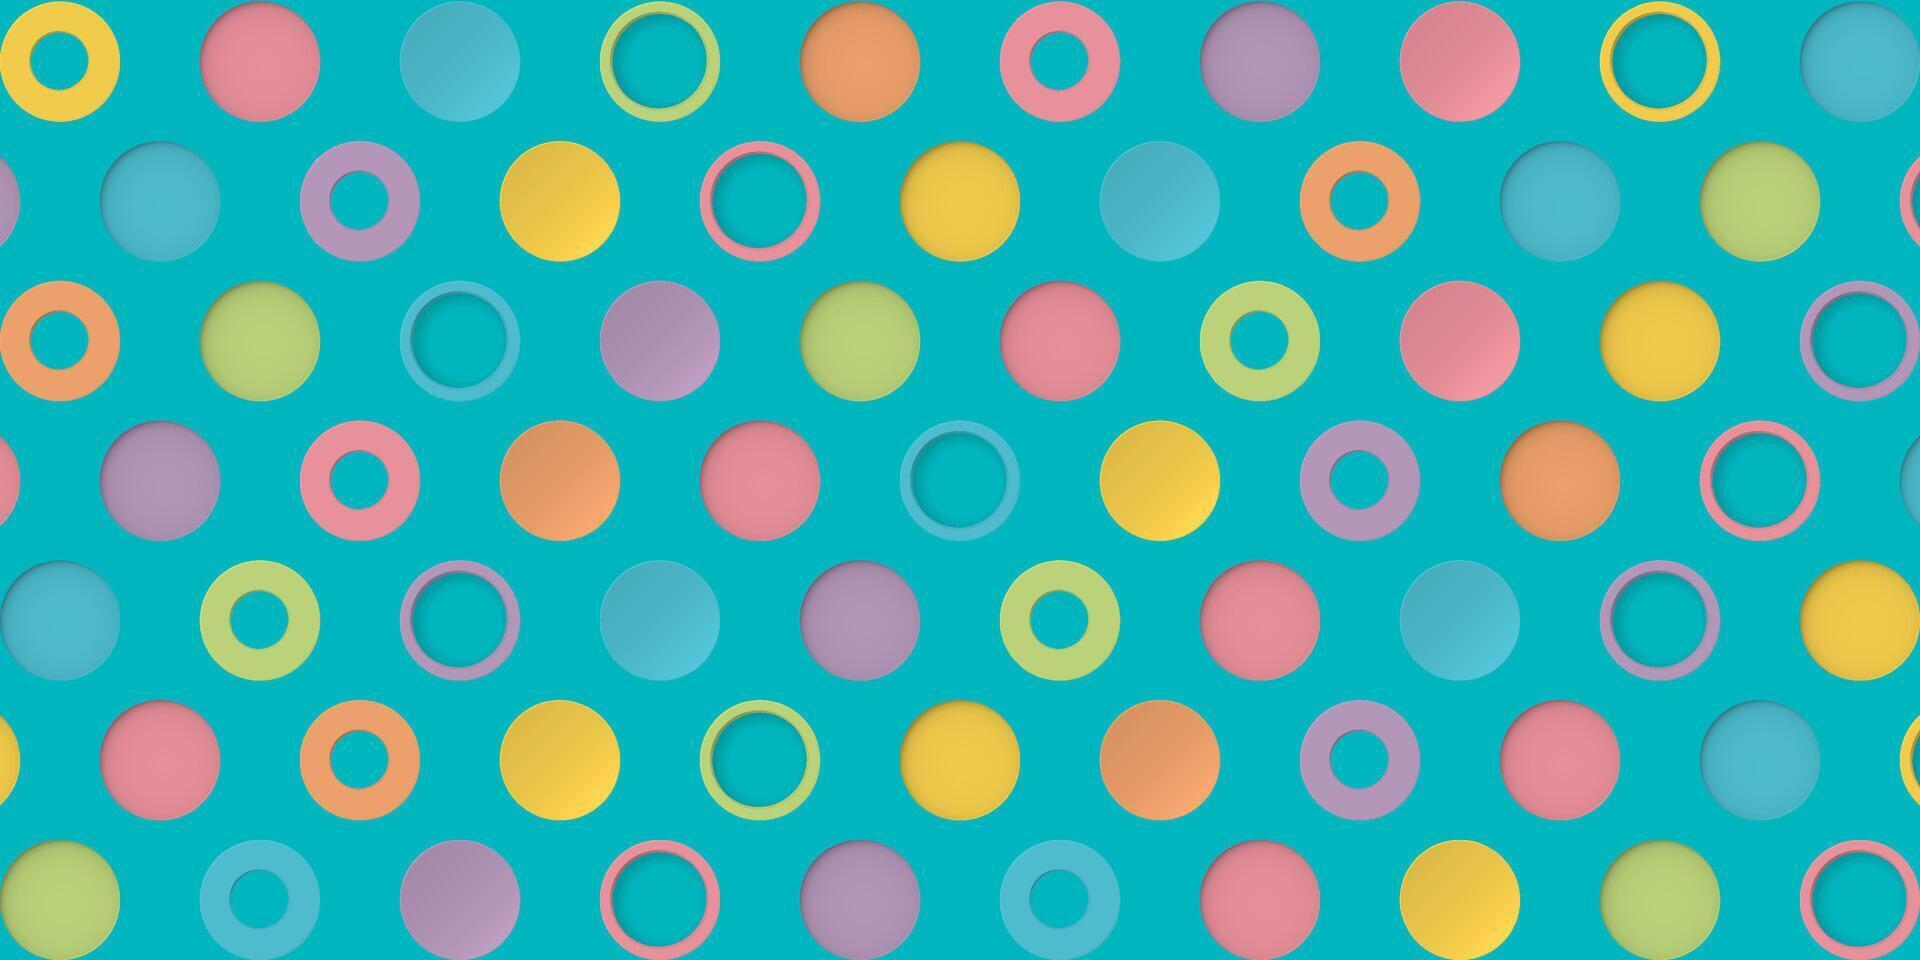 Colorful 3D circle shape pattern paper cut style on blue background vector illustration.